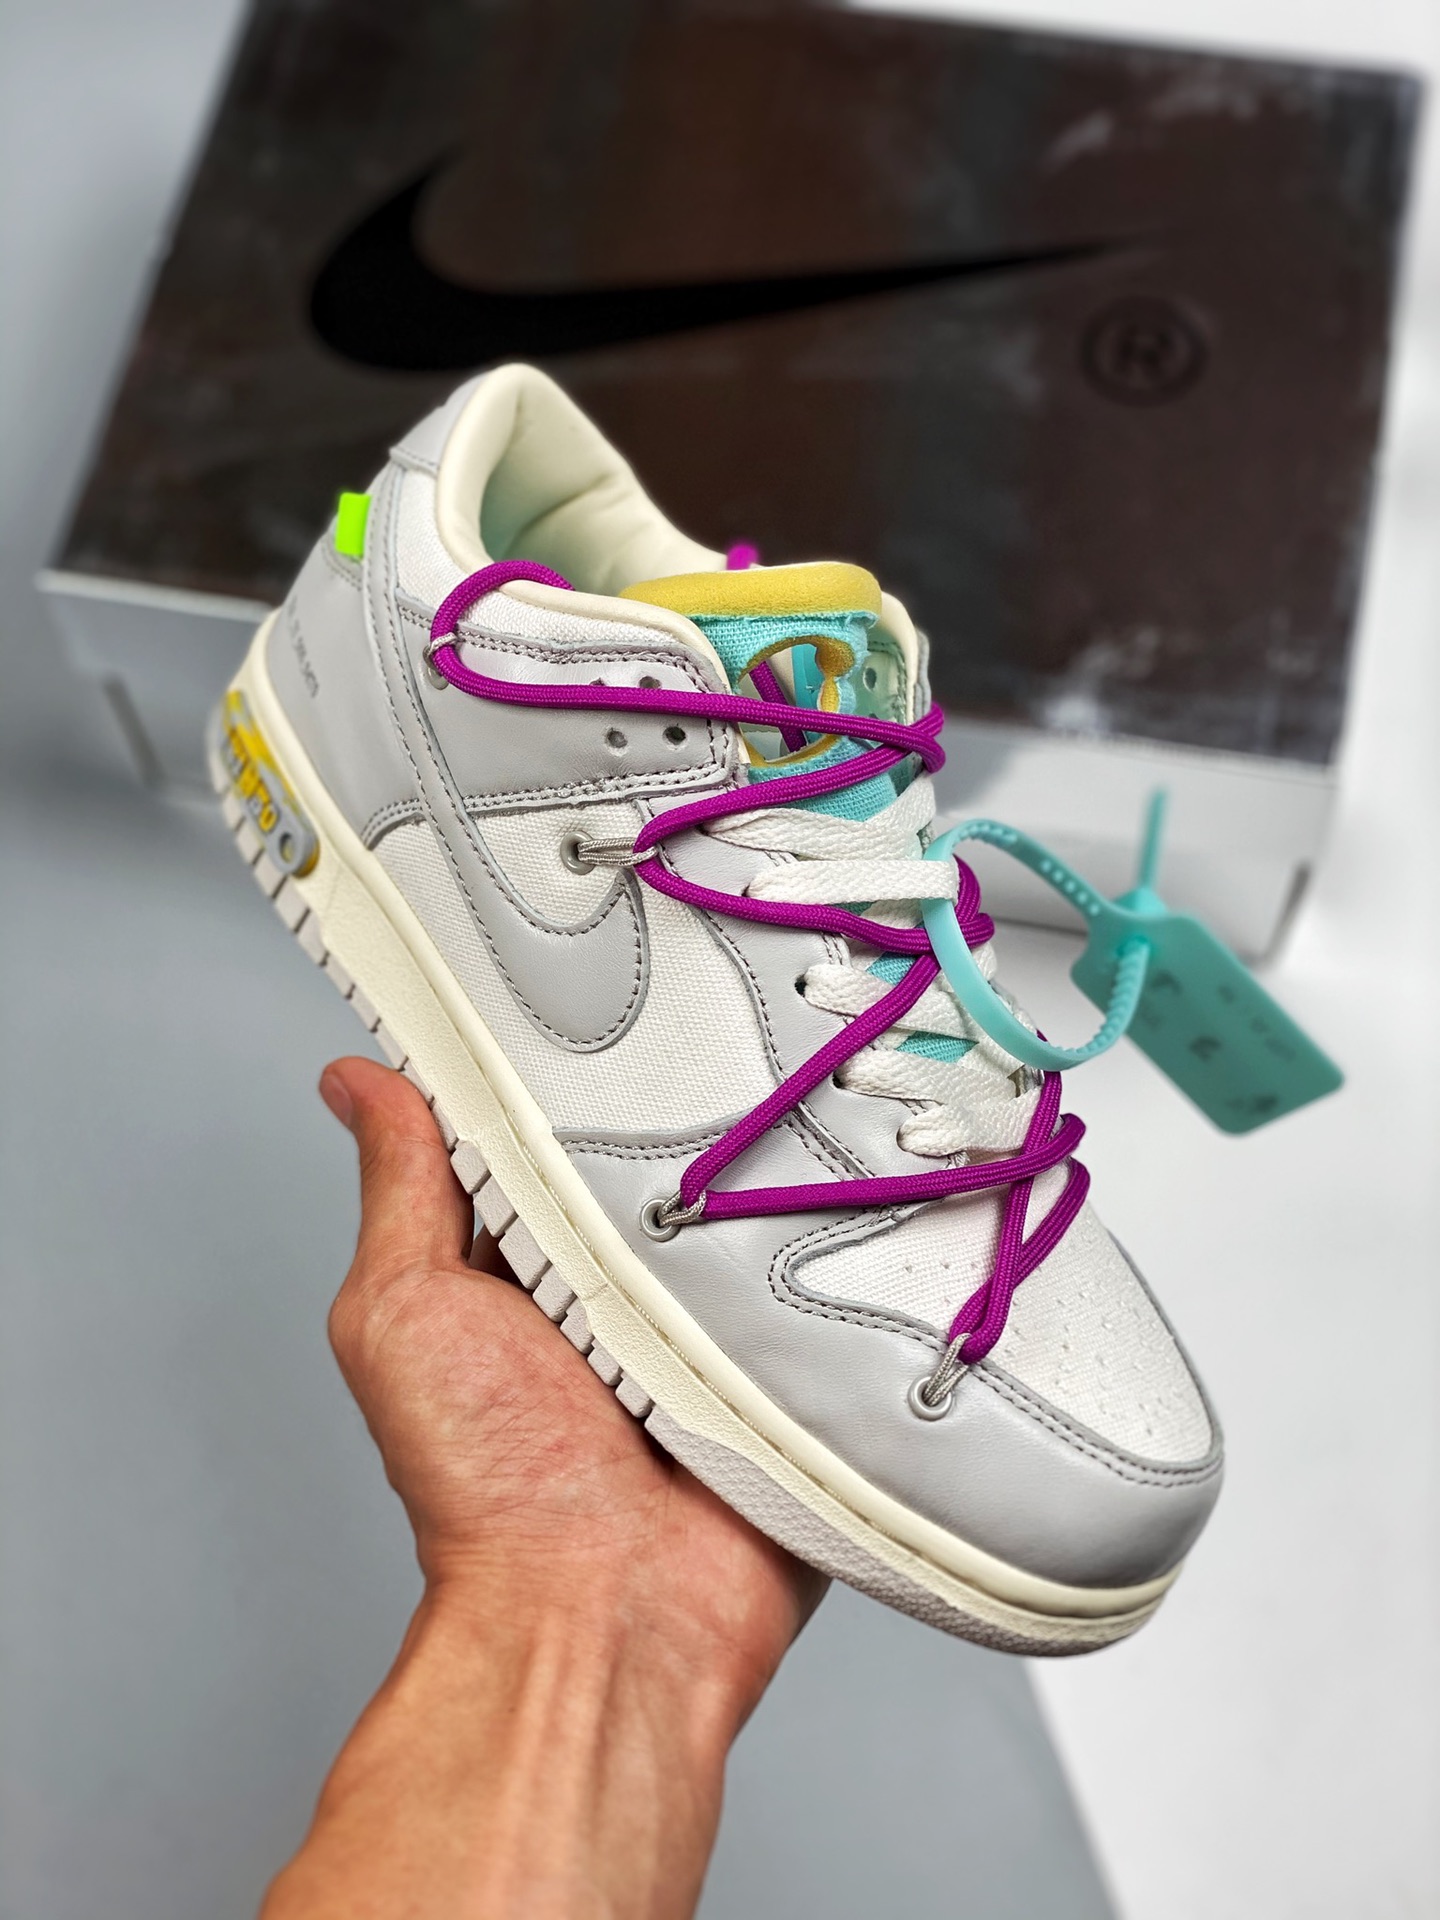 Off-White x Nike Dunk Low "21 of 50" Sail Grey Green Shoes